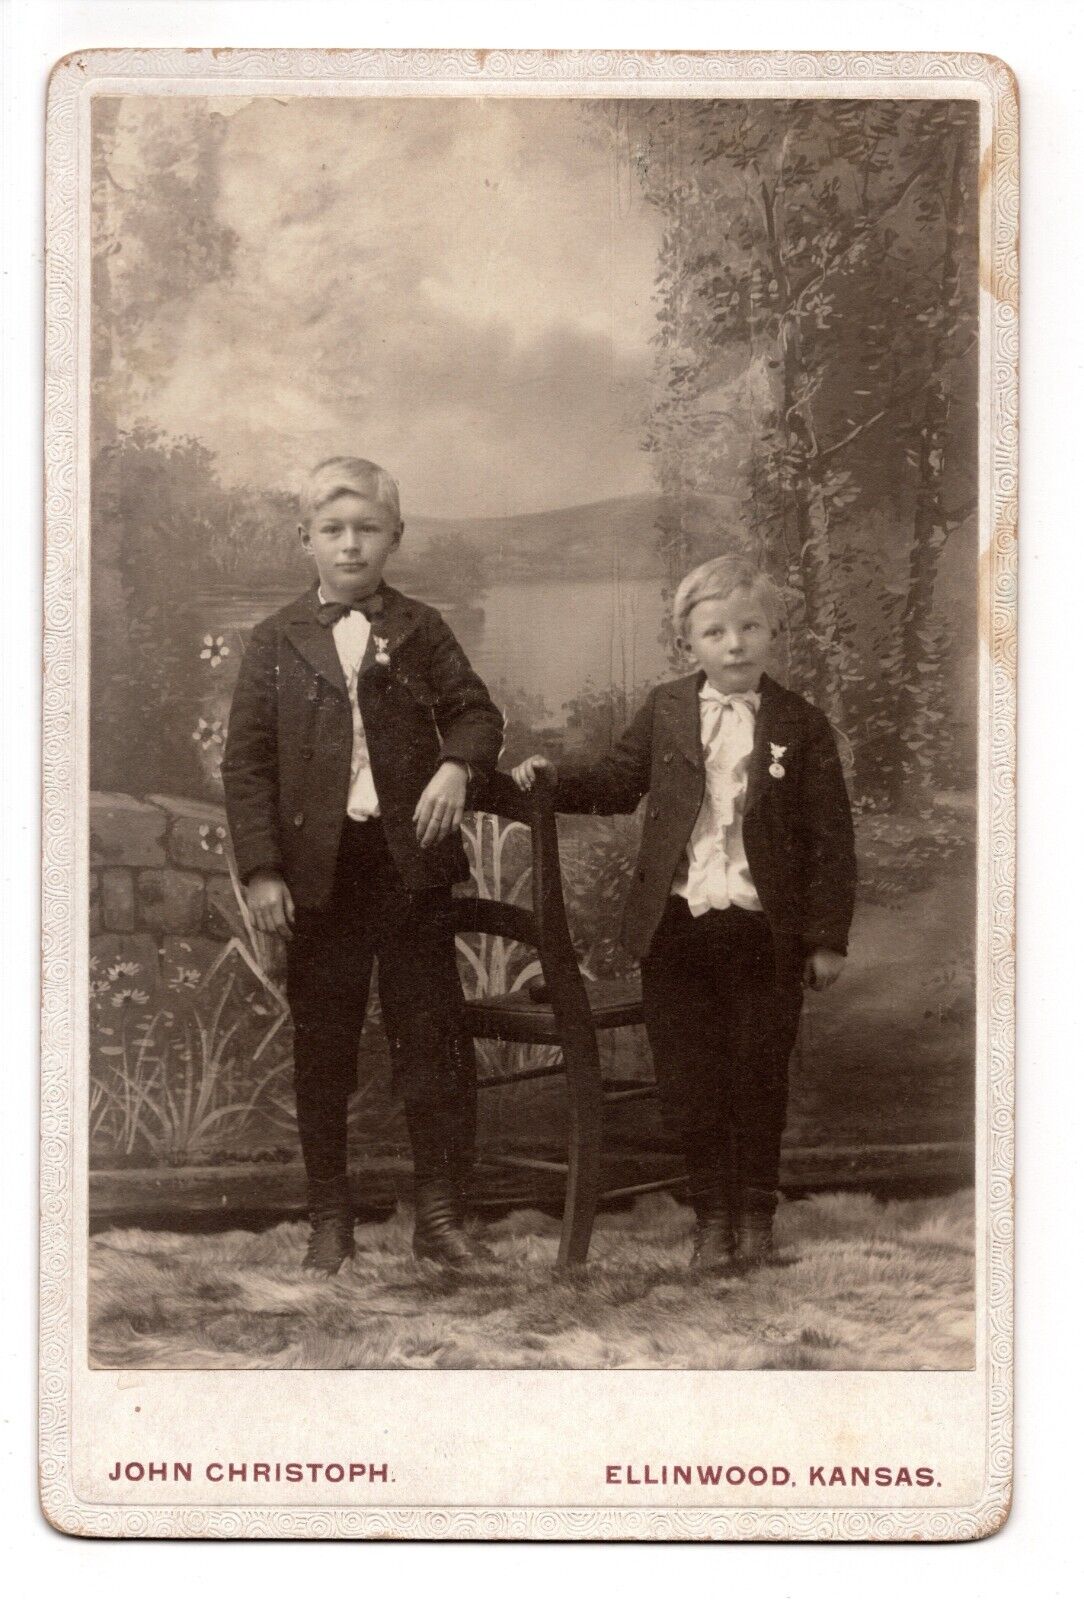 CIRCA 1890s CABINET CARD CHRISTOPH TWO YOUNG BOYS BROTHERS ELLINWOOD KANSAS